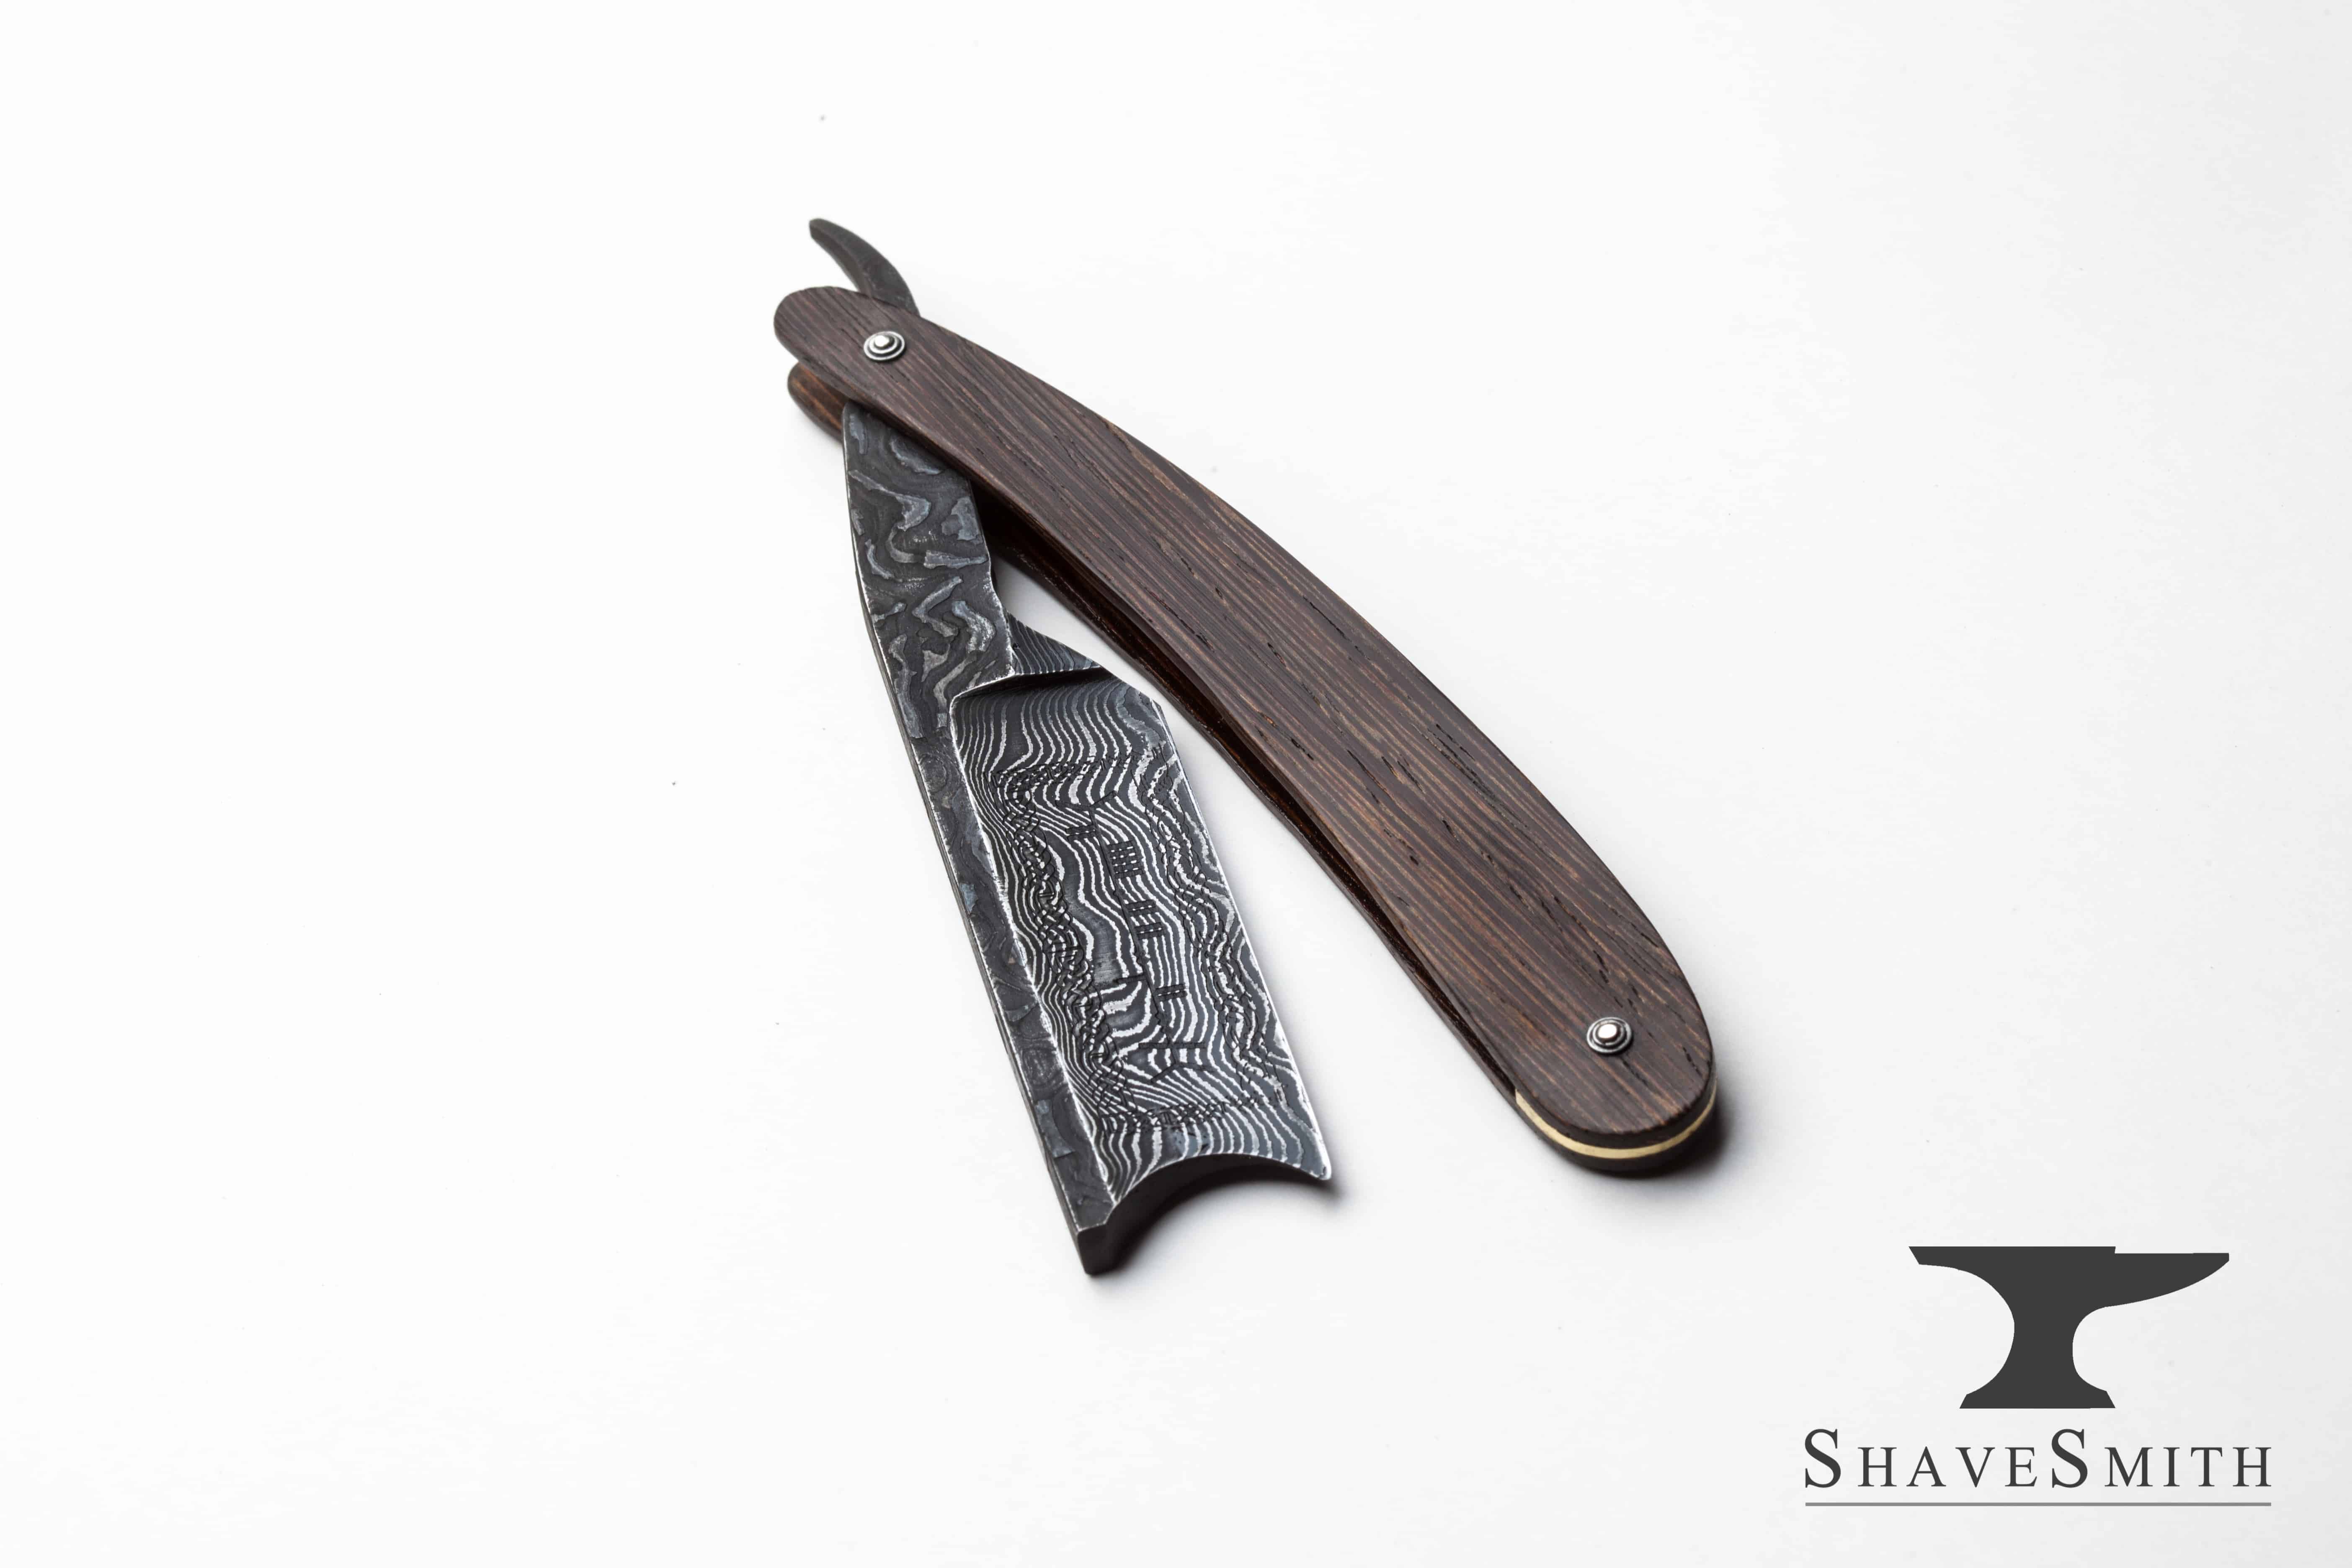 A shop update with recent work - a damascus blade with ancient Runes.